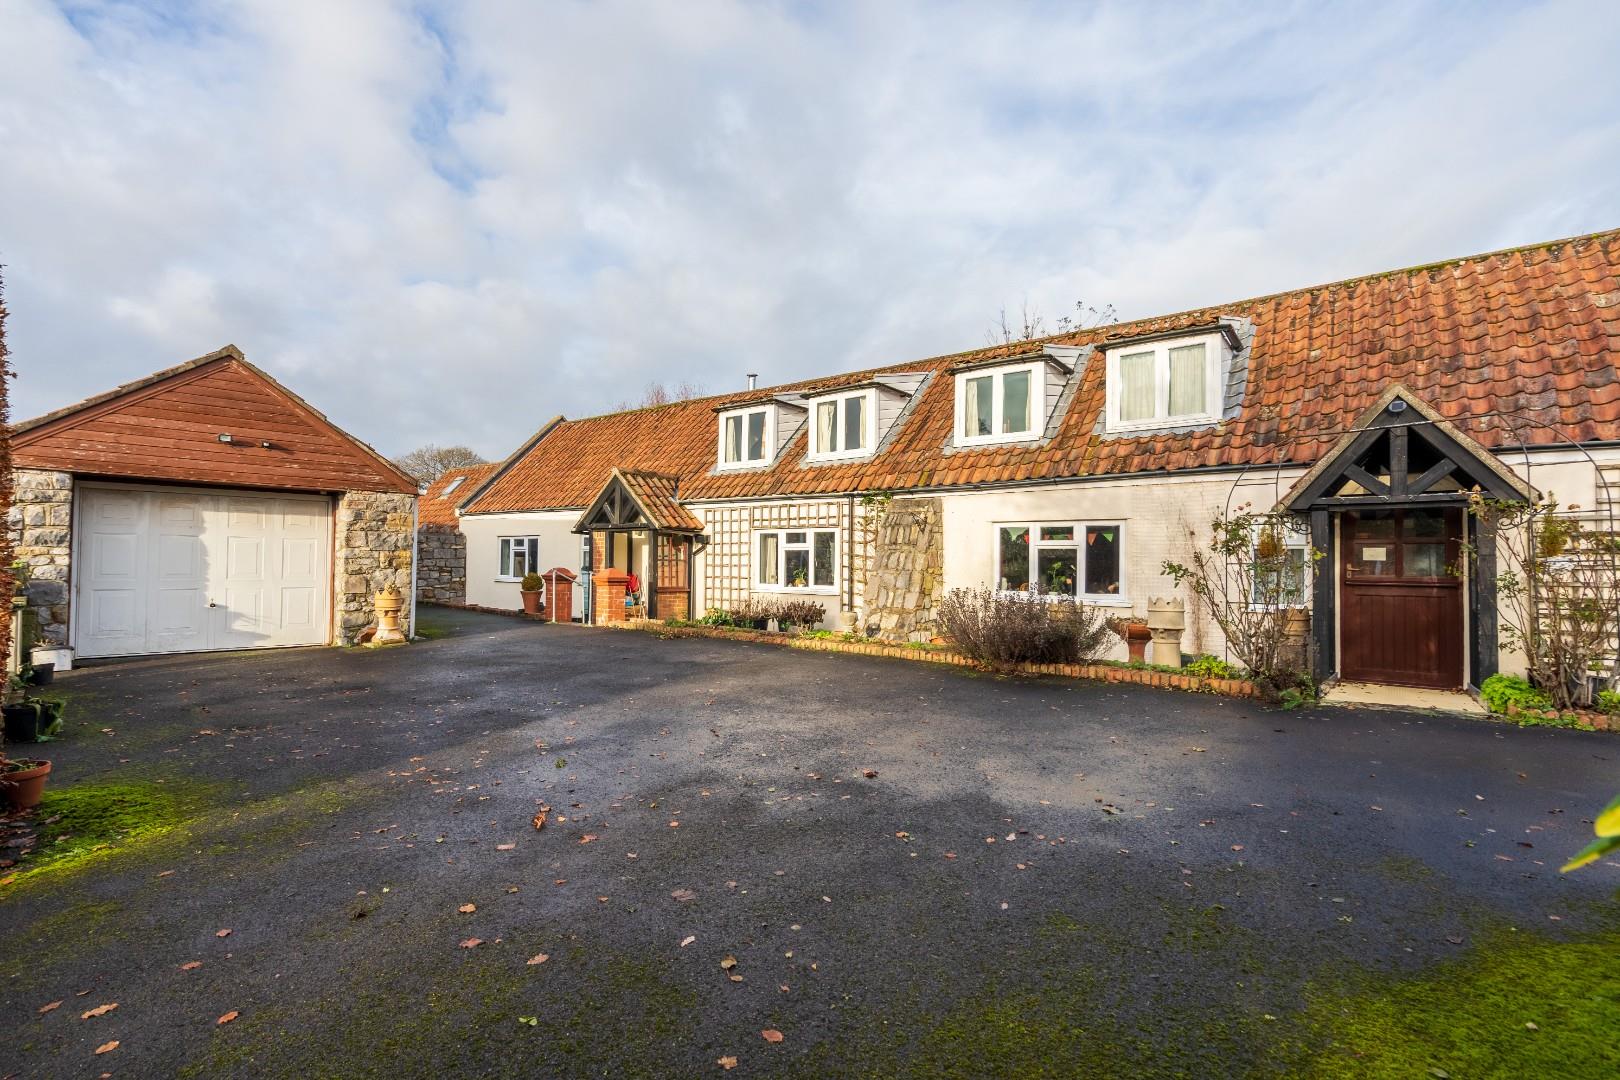 Charming barn conversion that enjoys a plot in excess of 5 acres in the hamlet of Aldwick